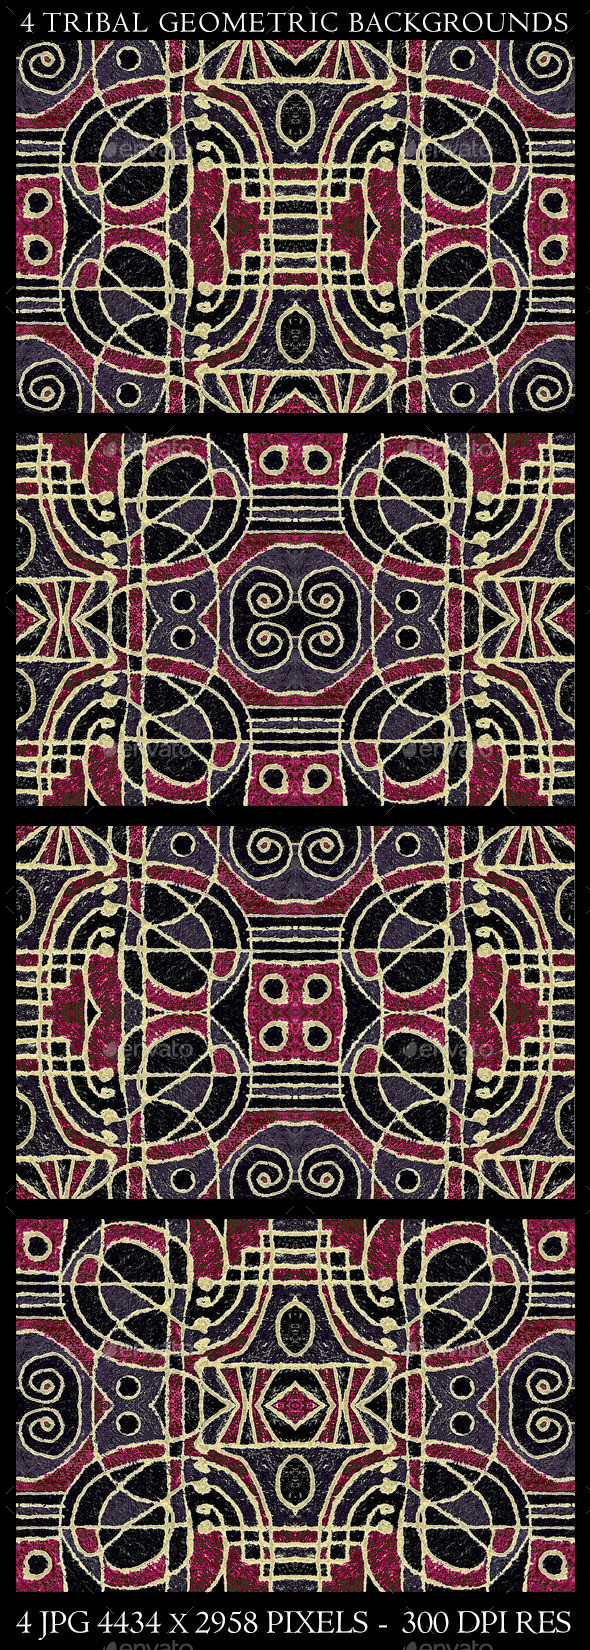 Preview 4 tribal geometric backgrounds